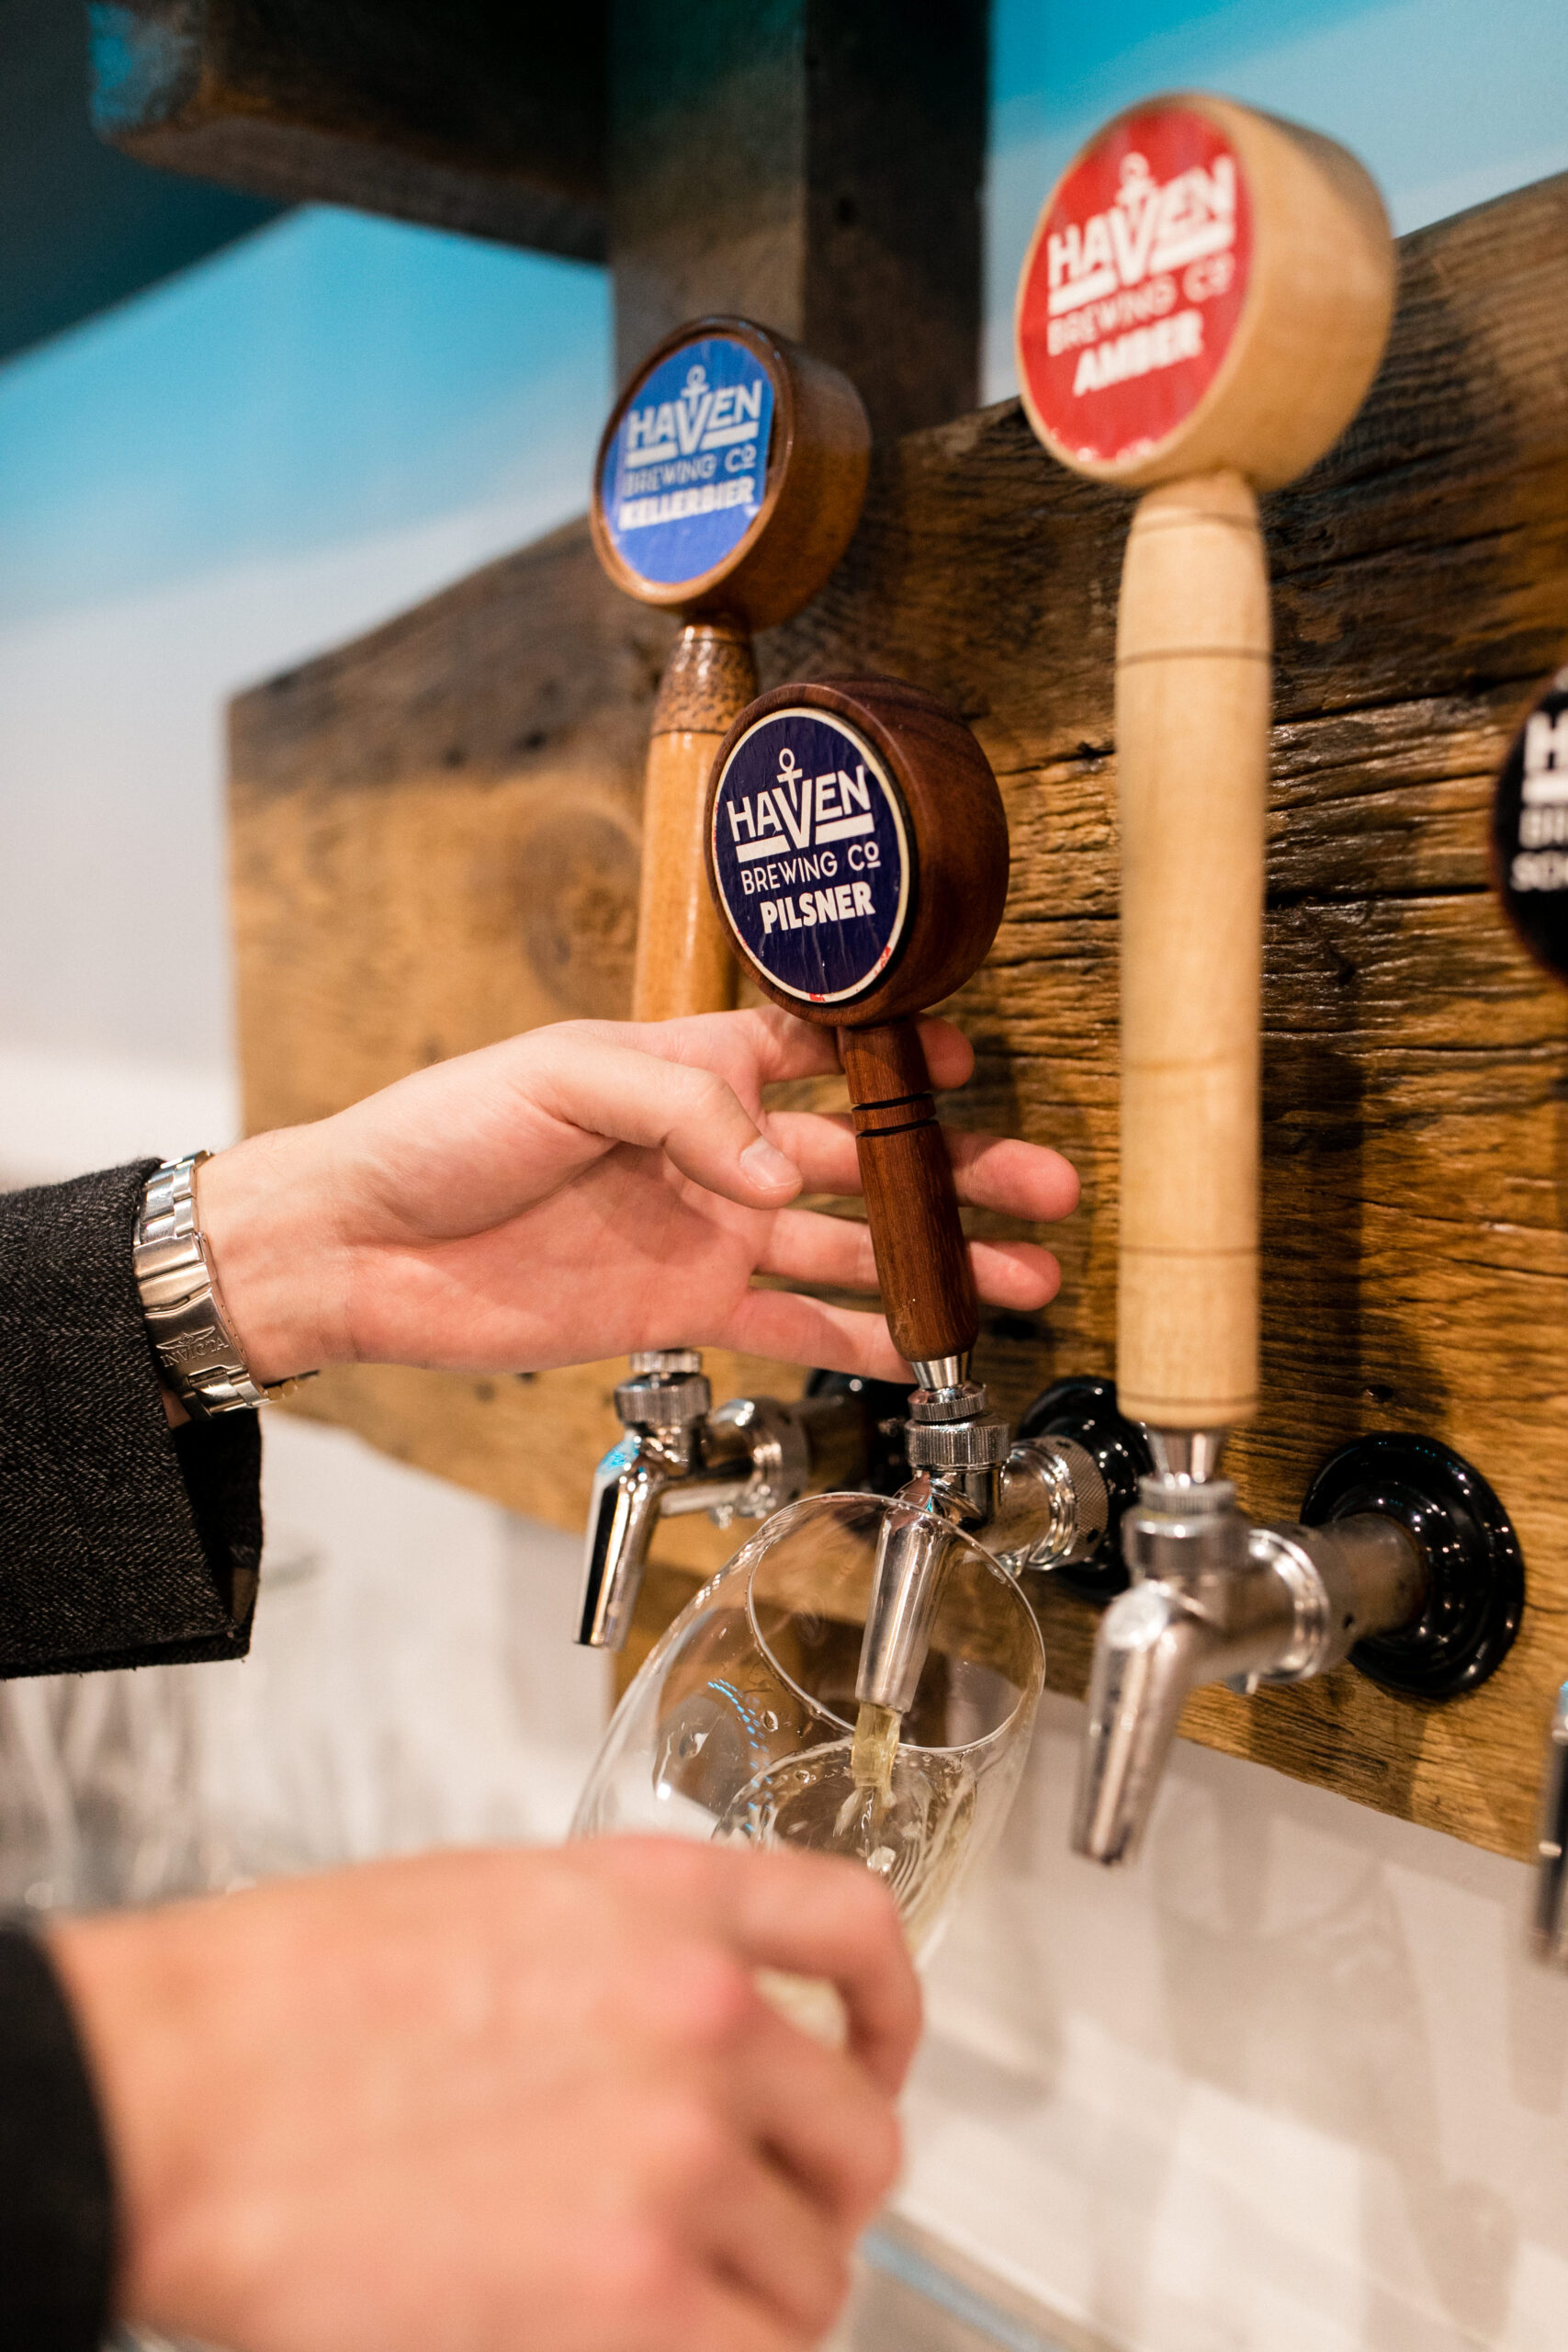 an image of a person pouring a beer from a beer tap